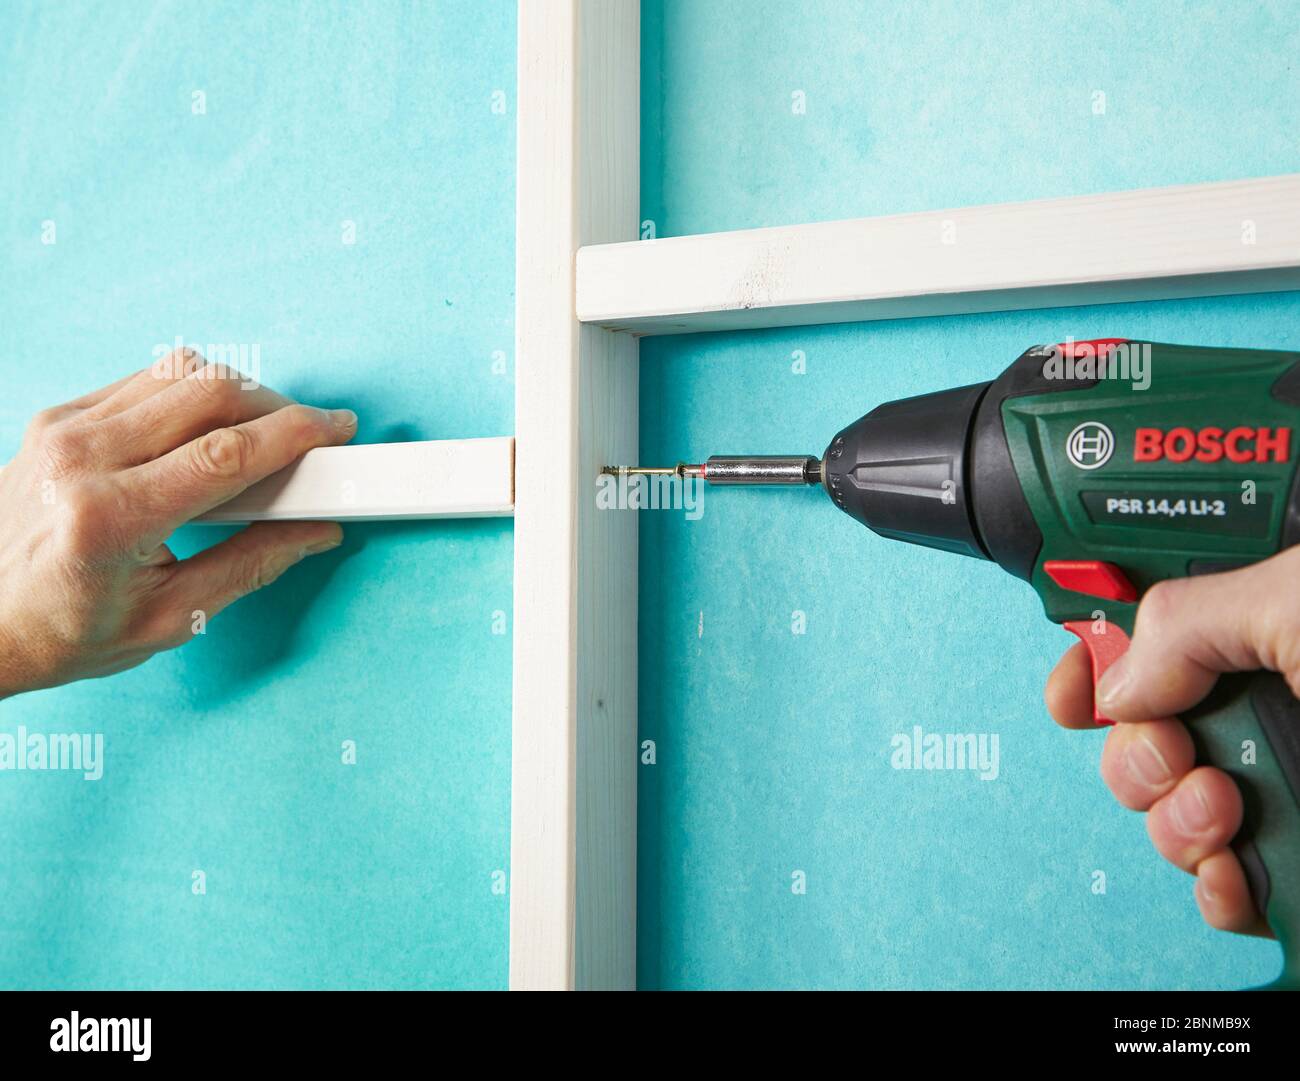 DIY wall design 02, step-by-step do-it-yourself production, various turquoise colored areas separated by white wooden strips, step 12: connecting the vertical and horizontal wooden strips with screws Stock Photo